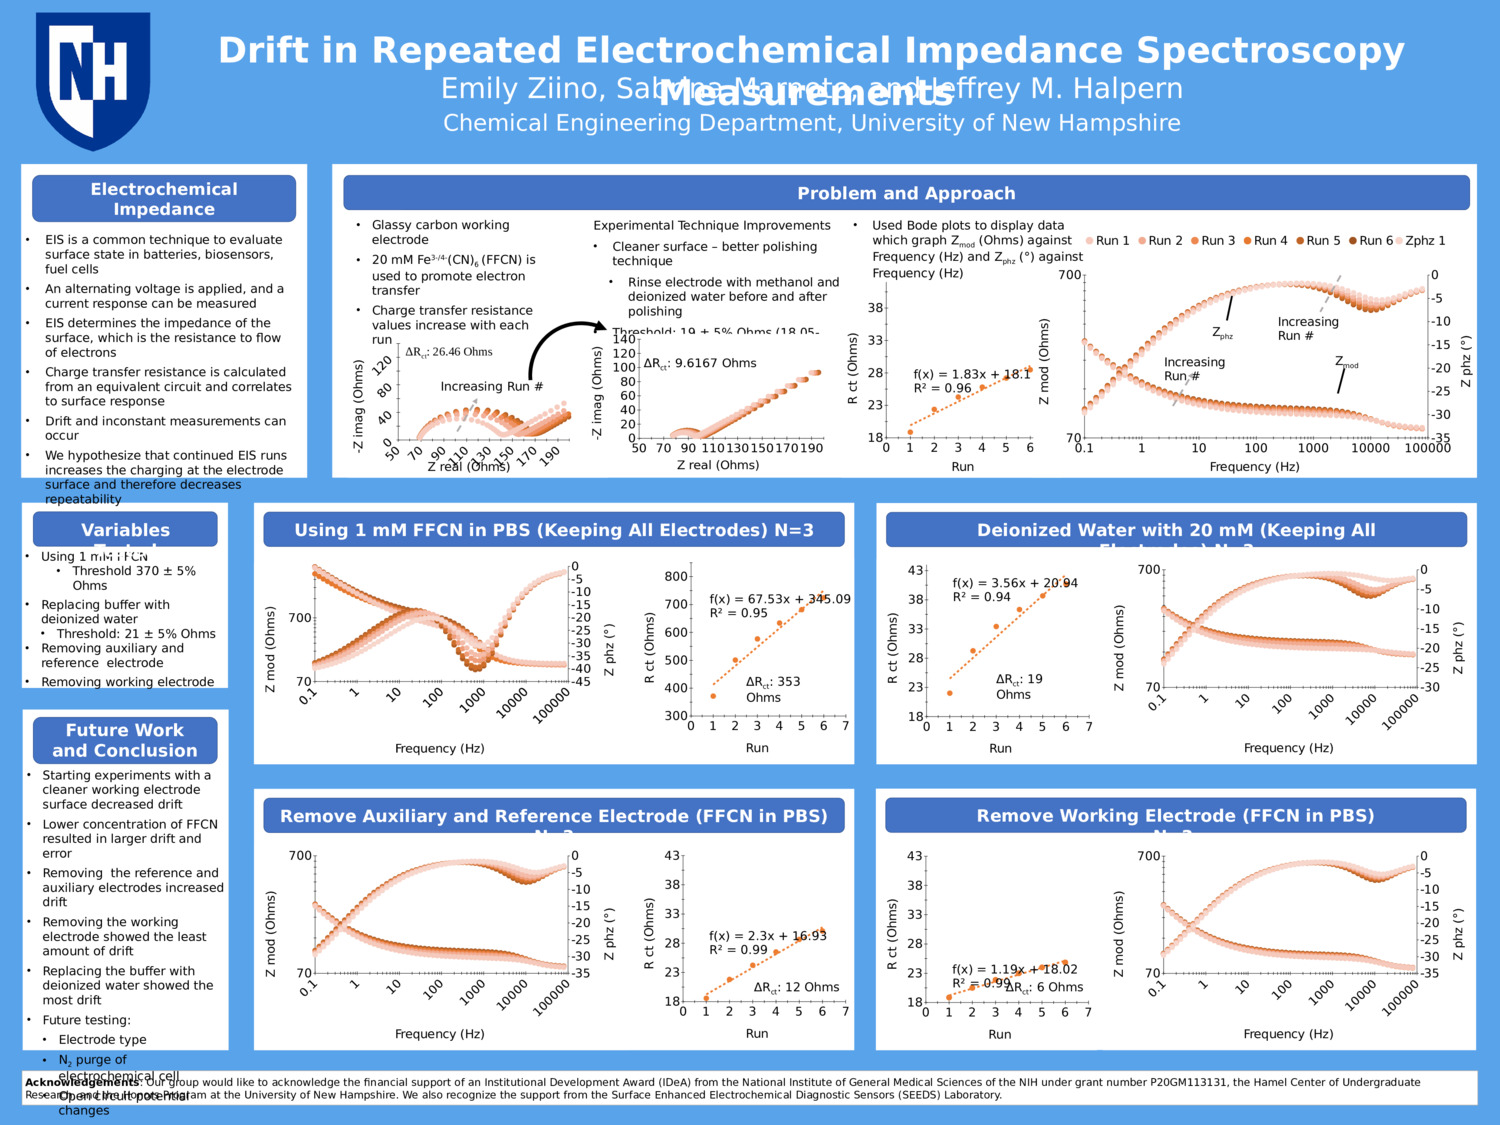 Drift In Repeated Electrochemical Impedance Spectroscopy Measurements  by erz1002